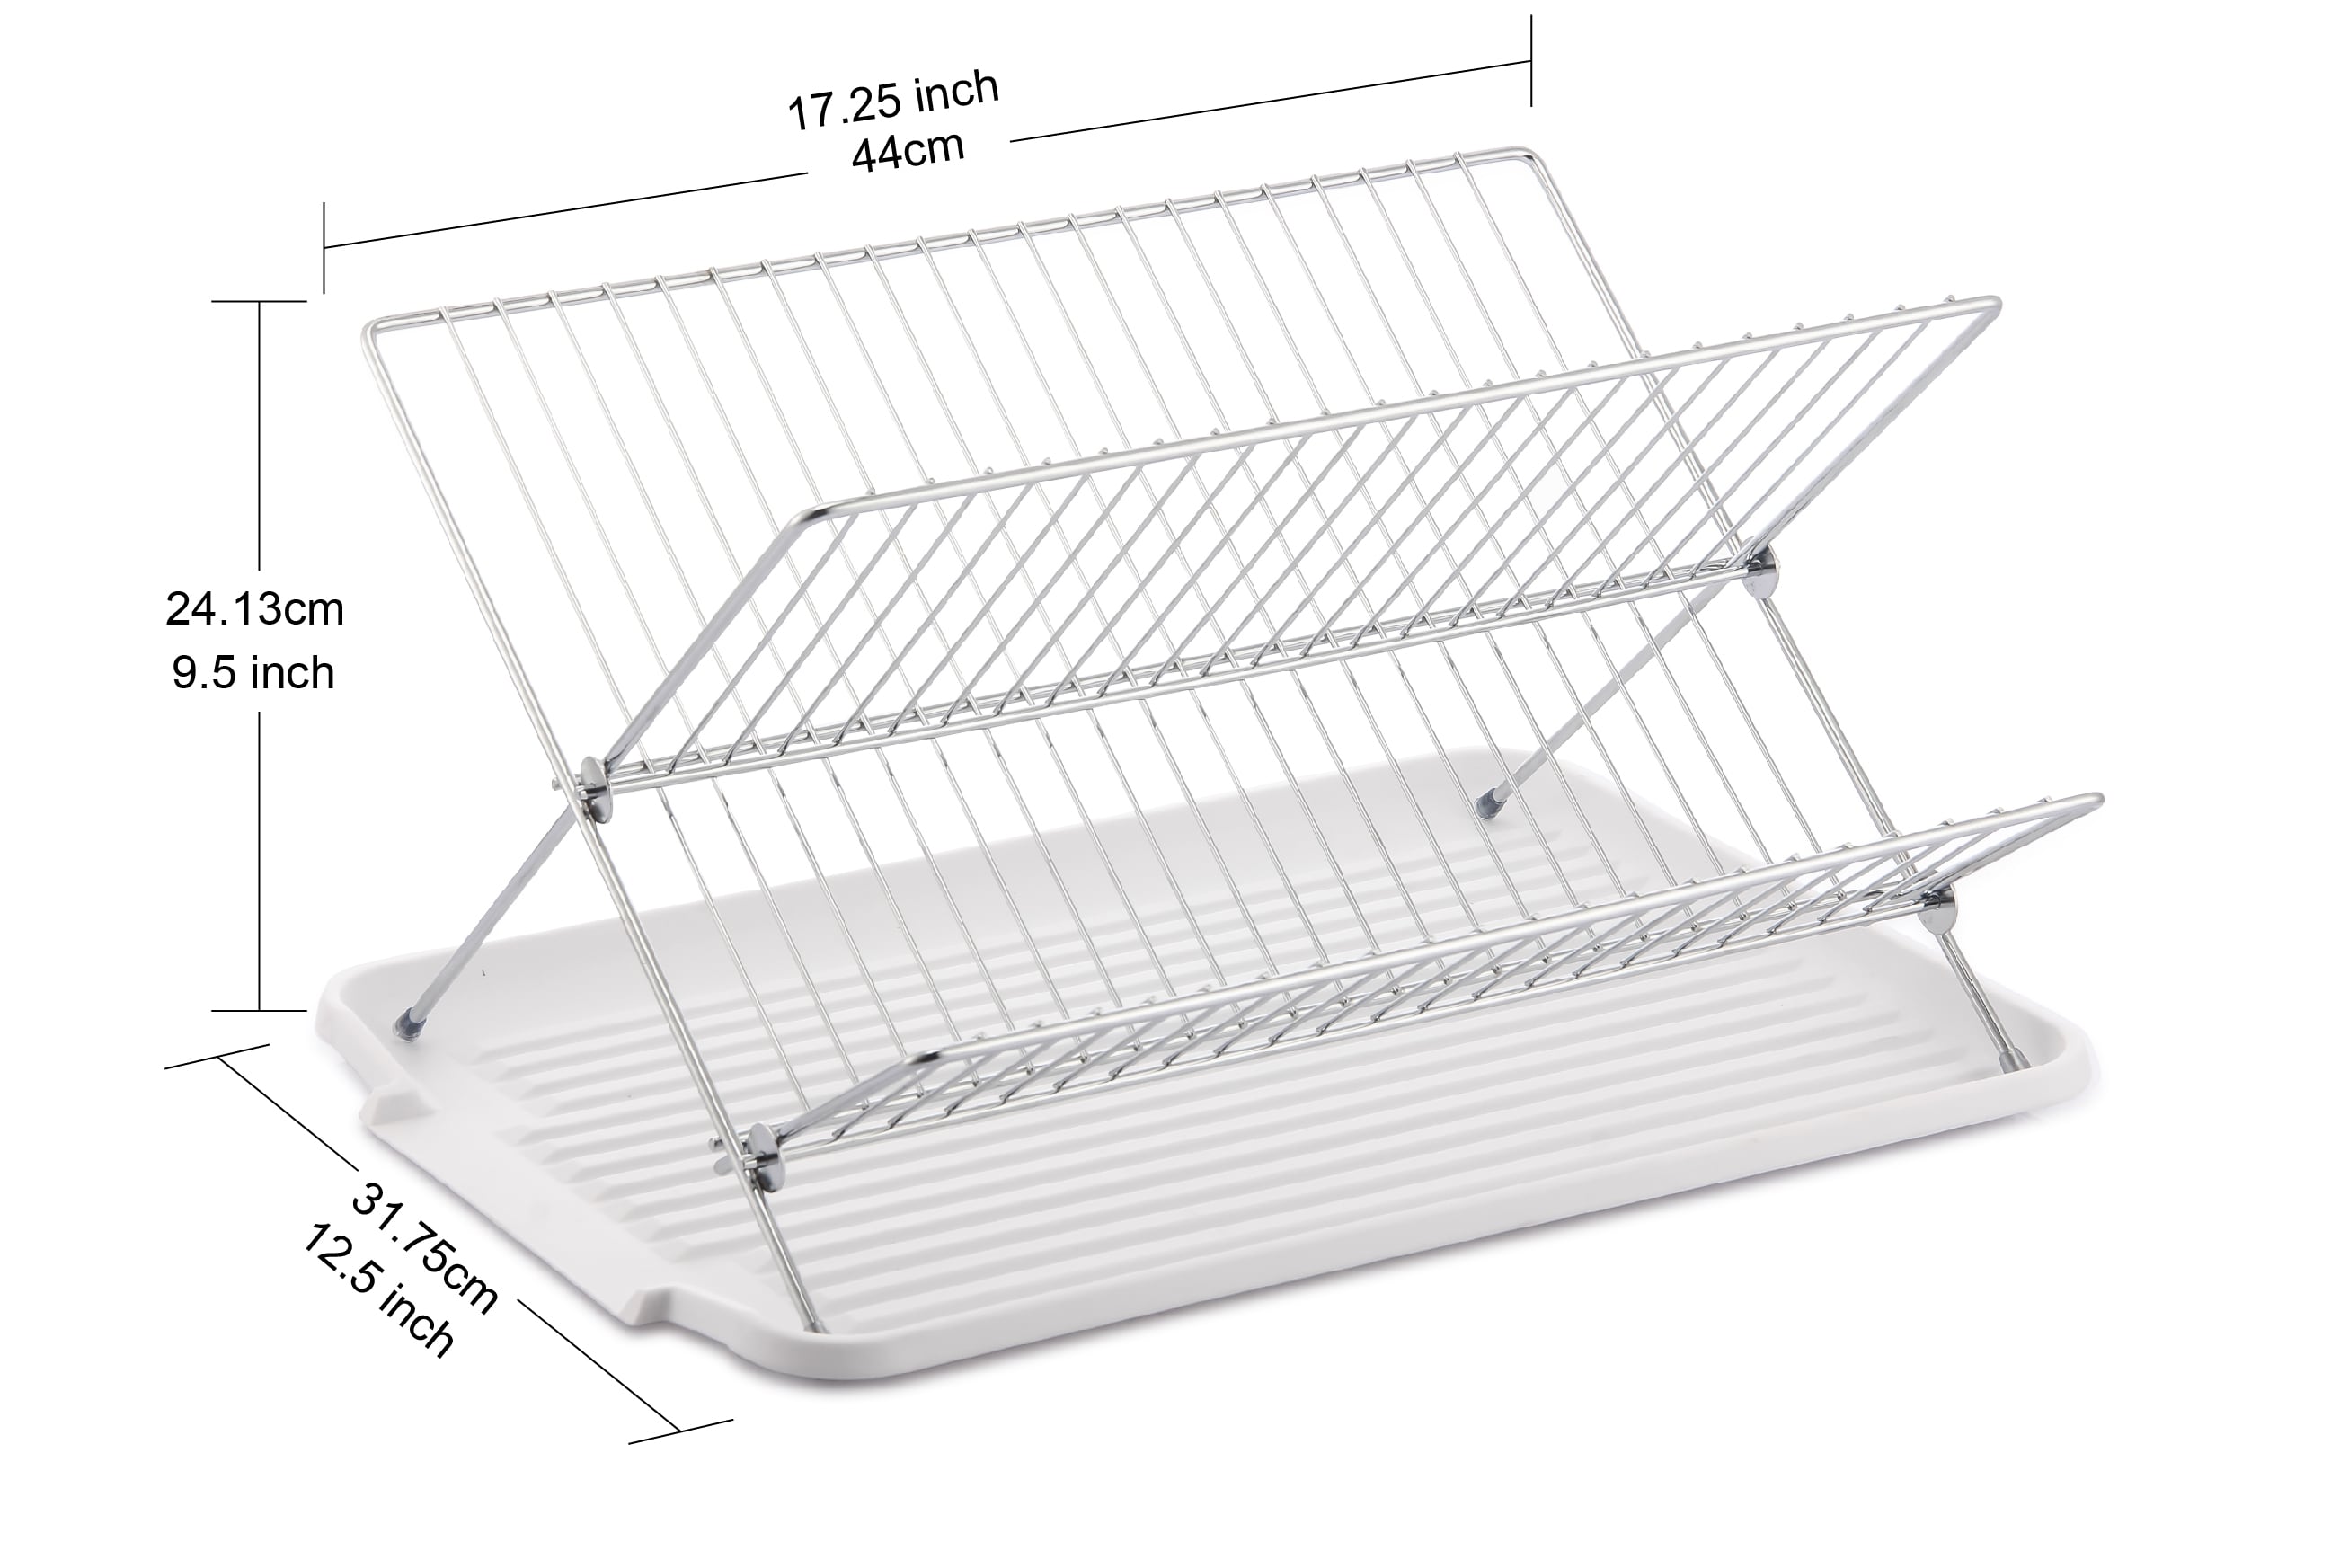 J&V TEXTILES Dish Drying Rack, Stainless Steel 2-Tier with Utensil Holder,  Cutting Board Holder and Dish Drainer for Kitchen Counter (18-Inch)